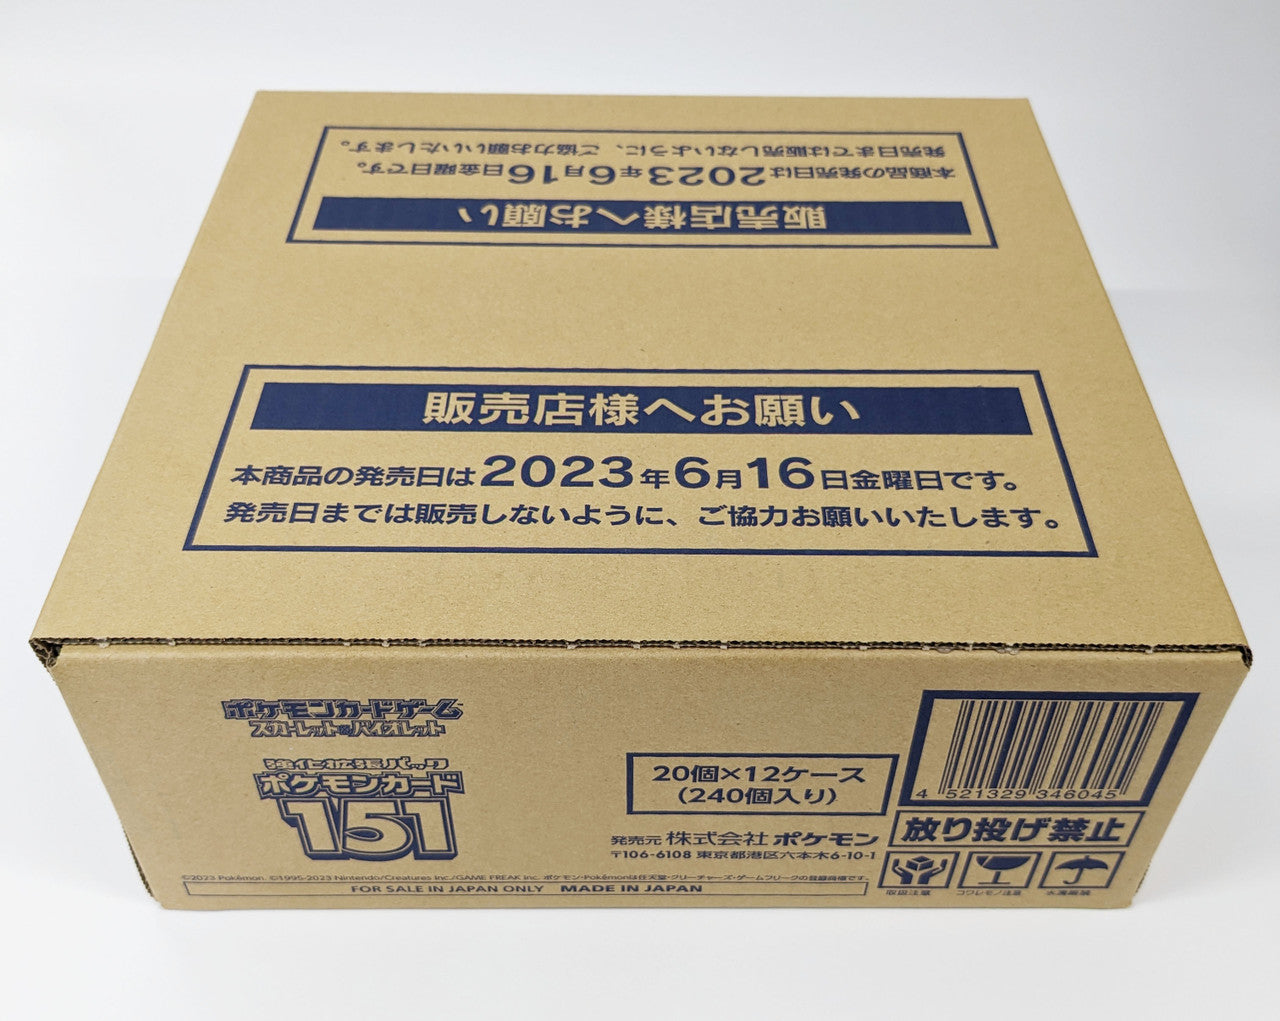 Pokemon 151 Booster Box Factory Sealed Case - 12 Boxes (Japanese)